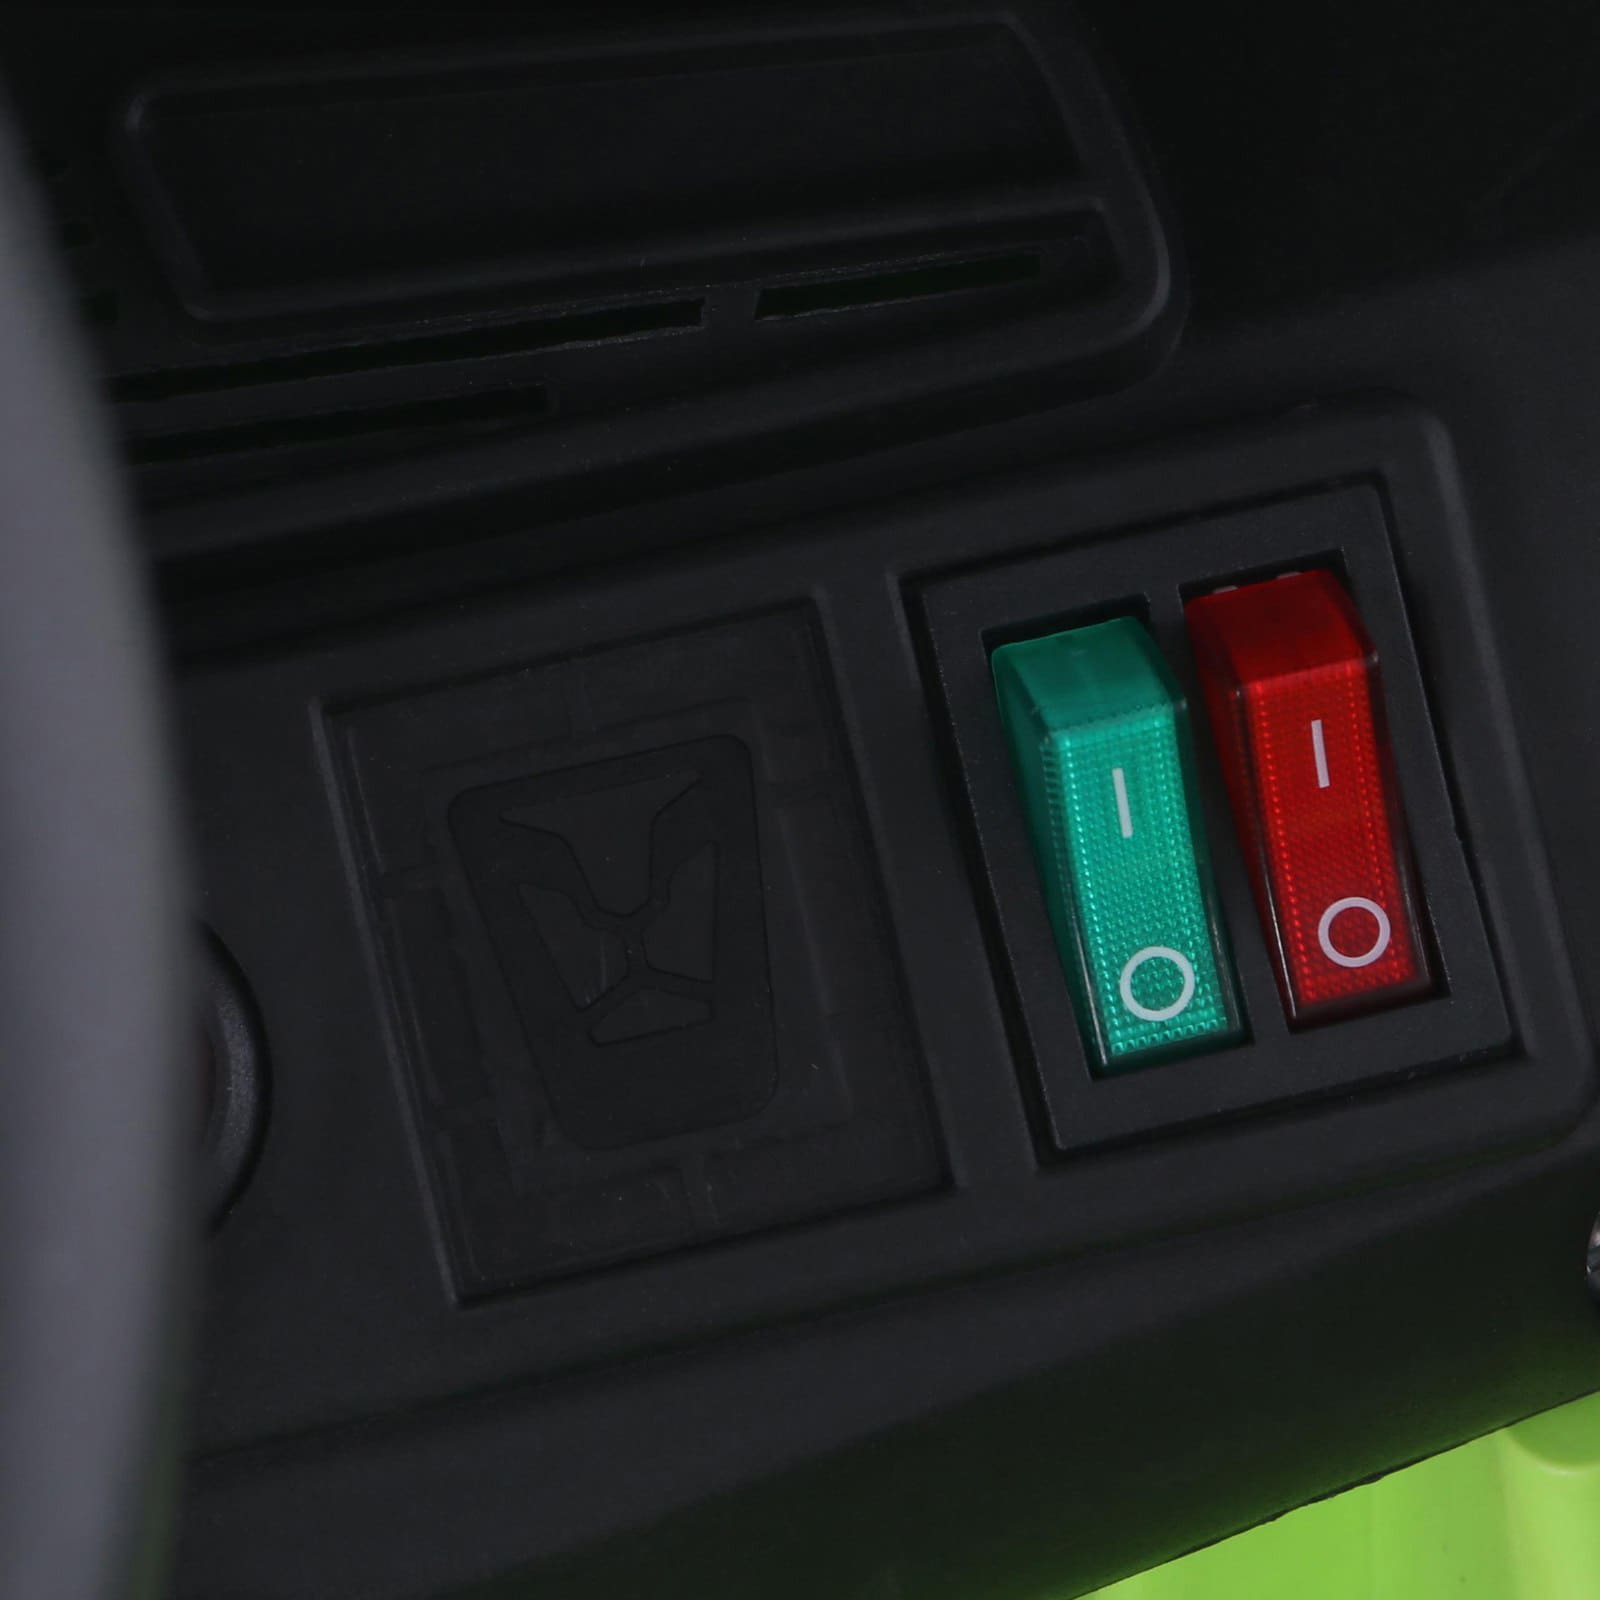 power on-off buttons